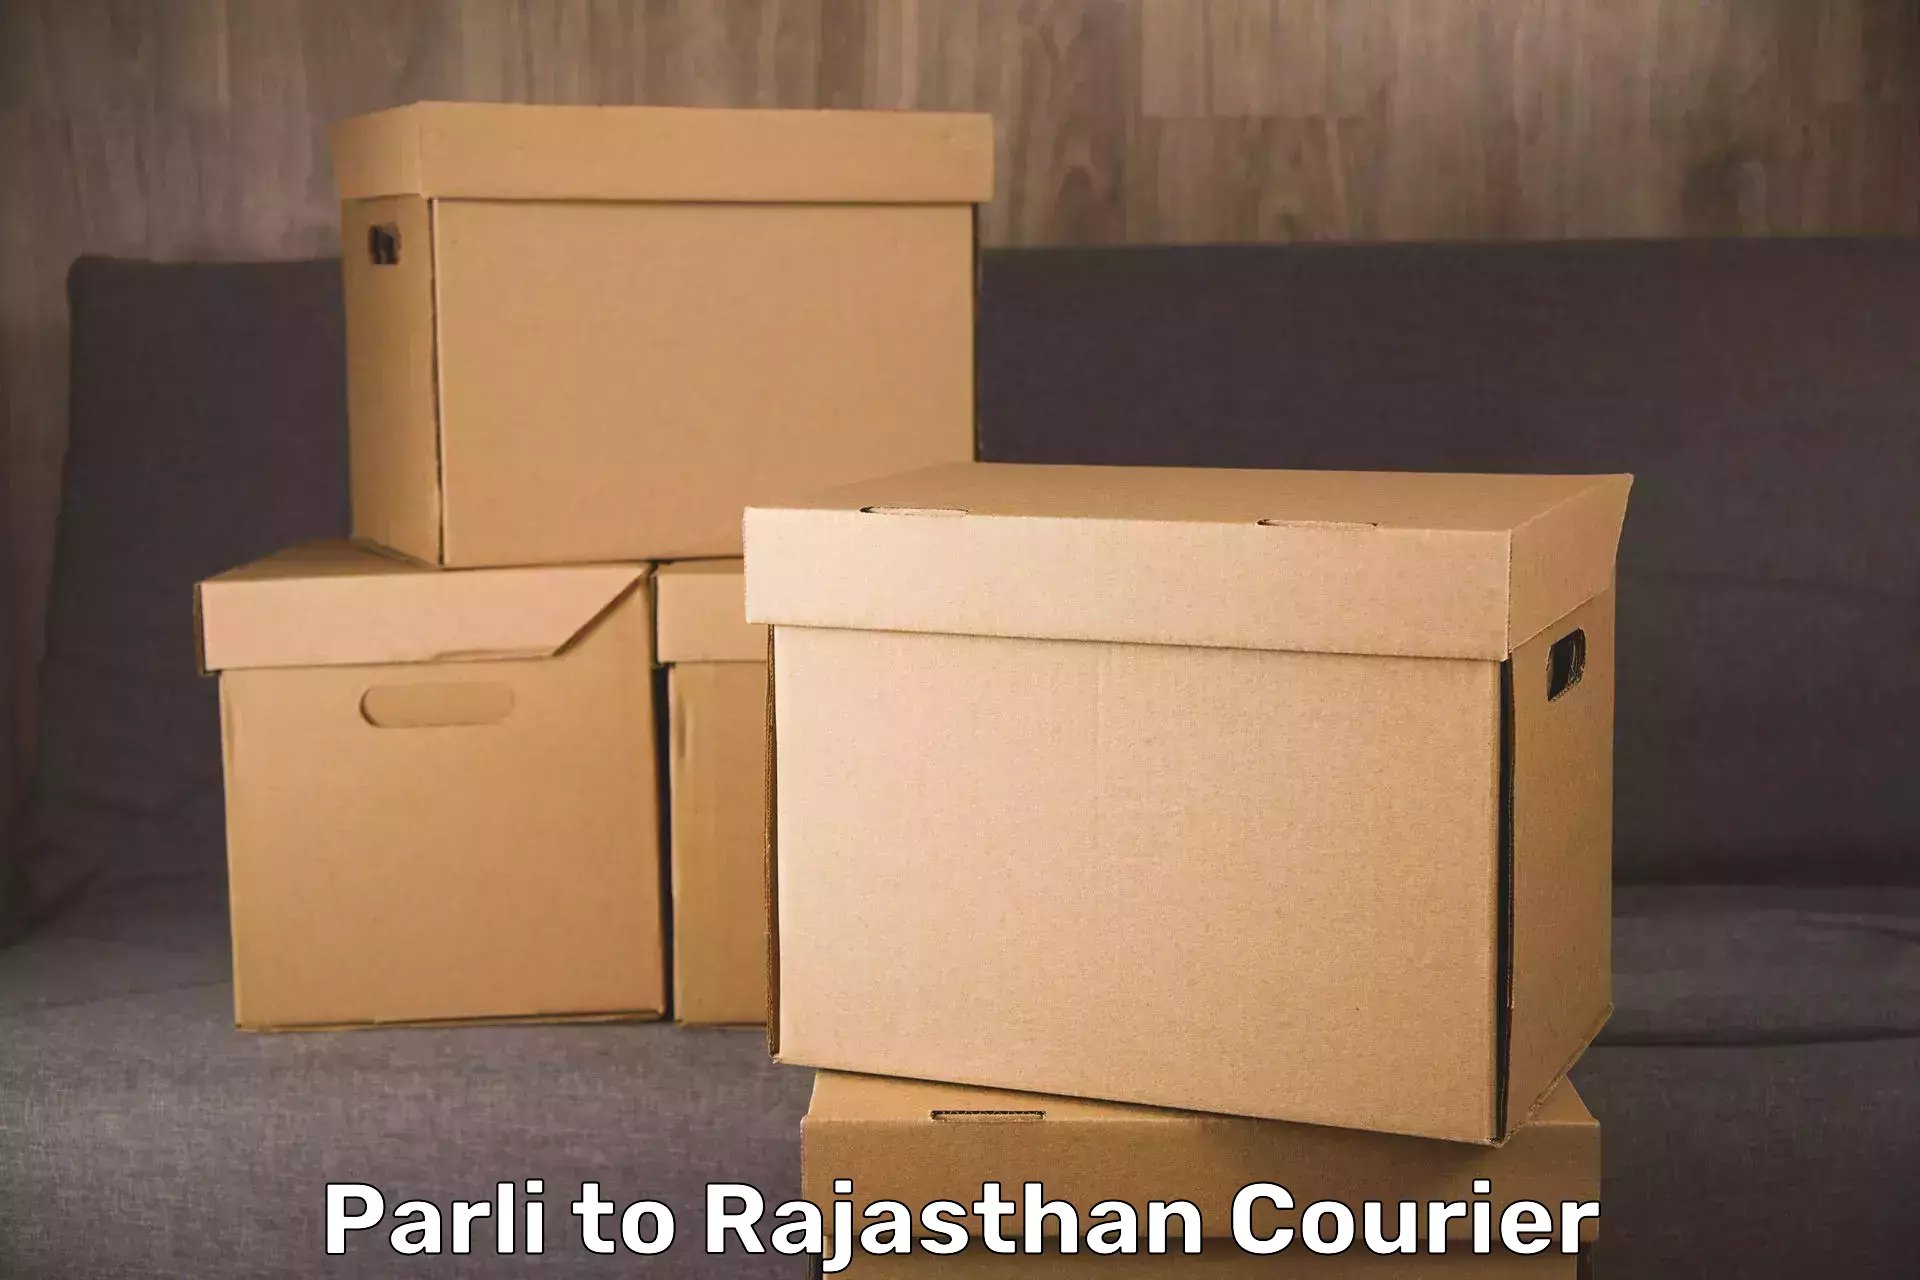 Nationwide luggage courier Parli to Pokhran